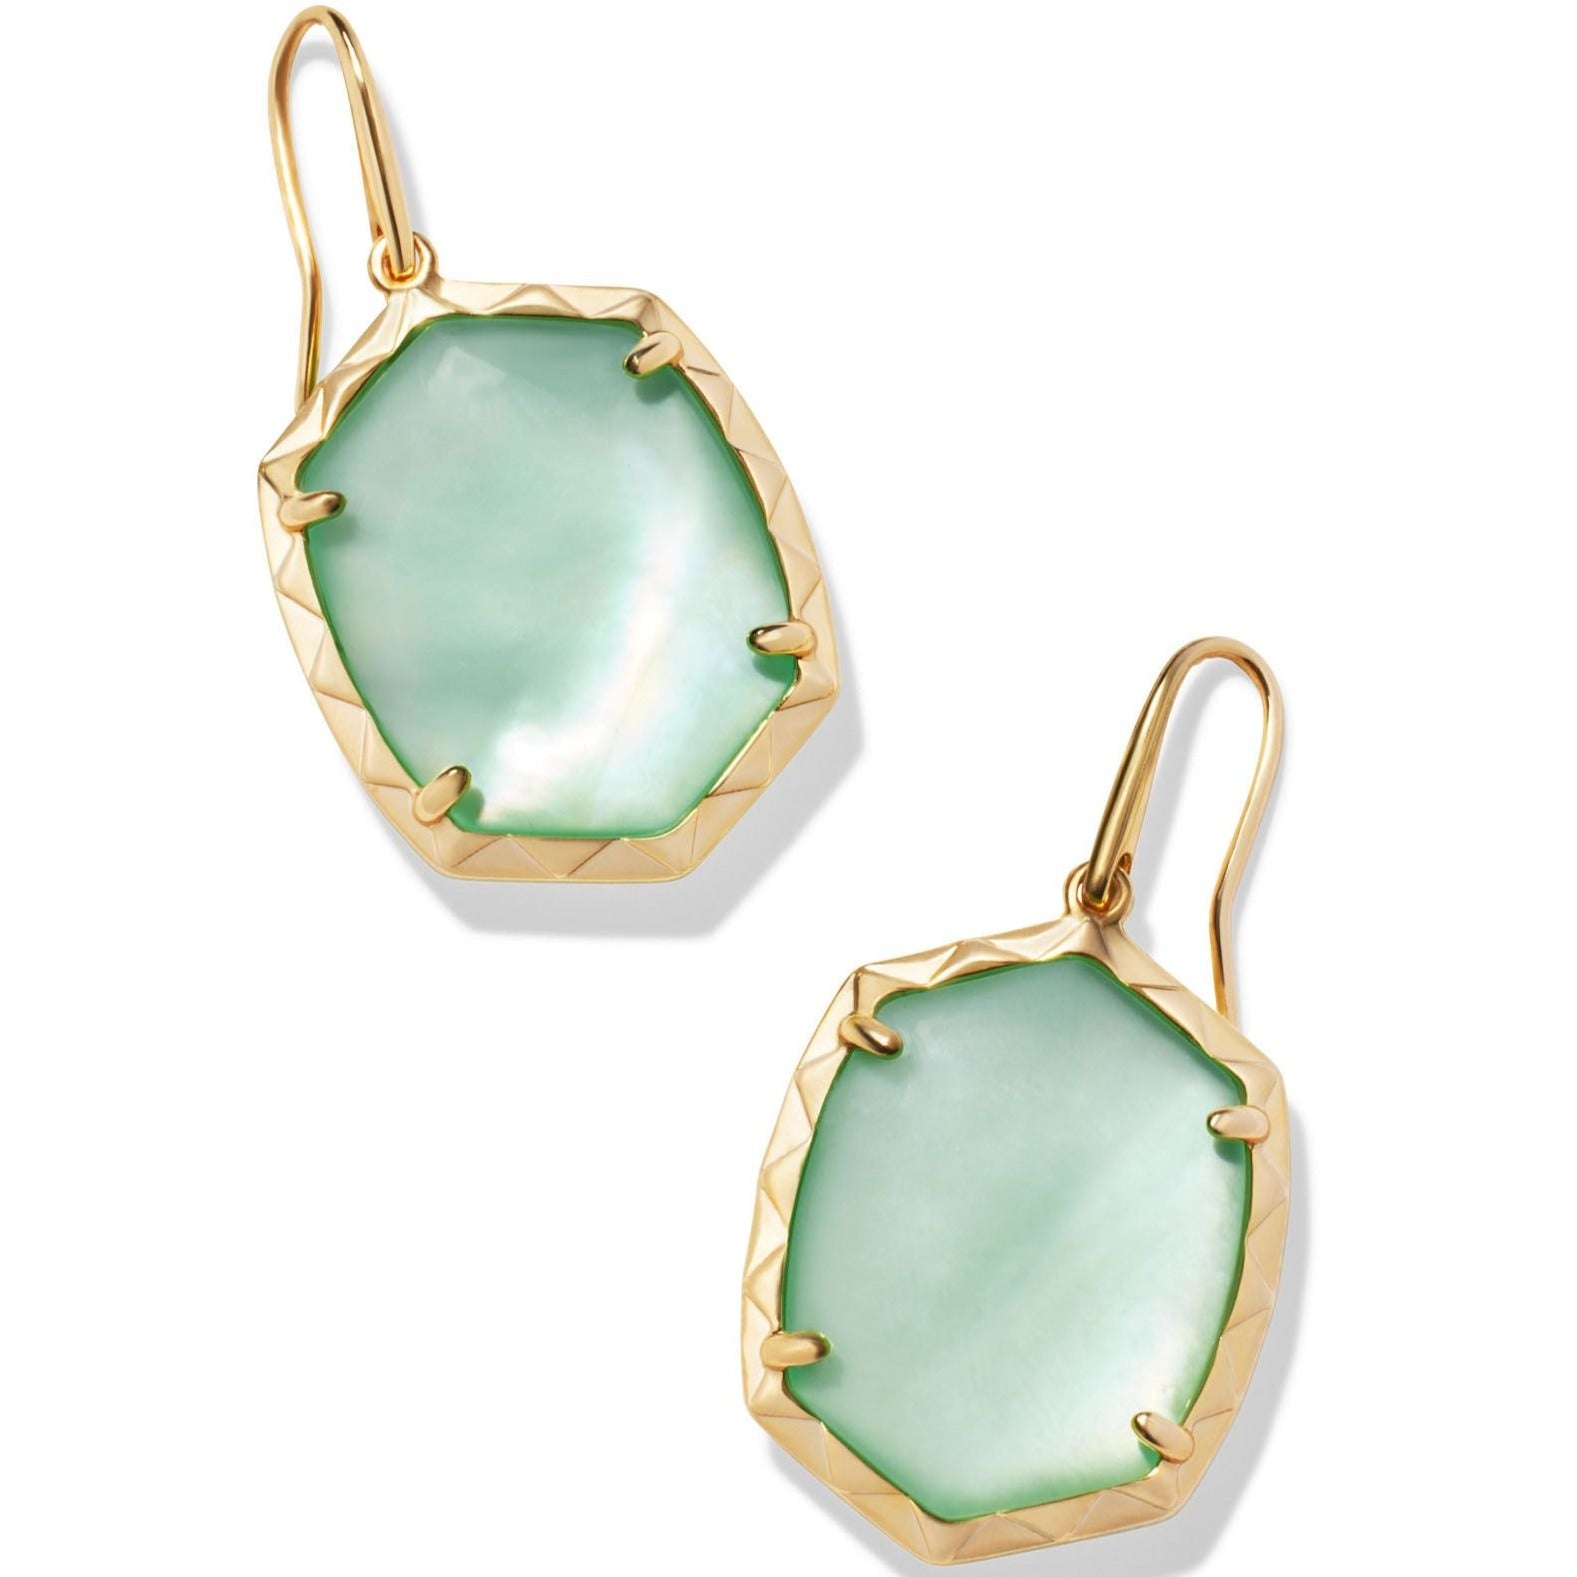 Kendra Scott | Daphne Gold Drop Earrings in Light Green Mother of Pearl - Giddy Up Glamour Boutique